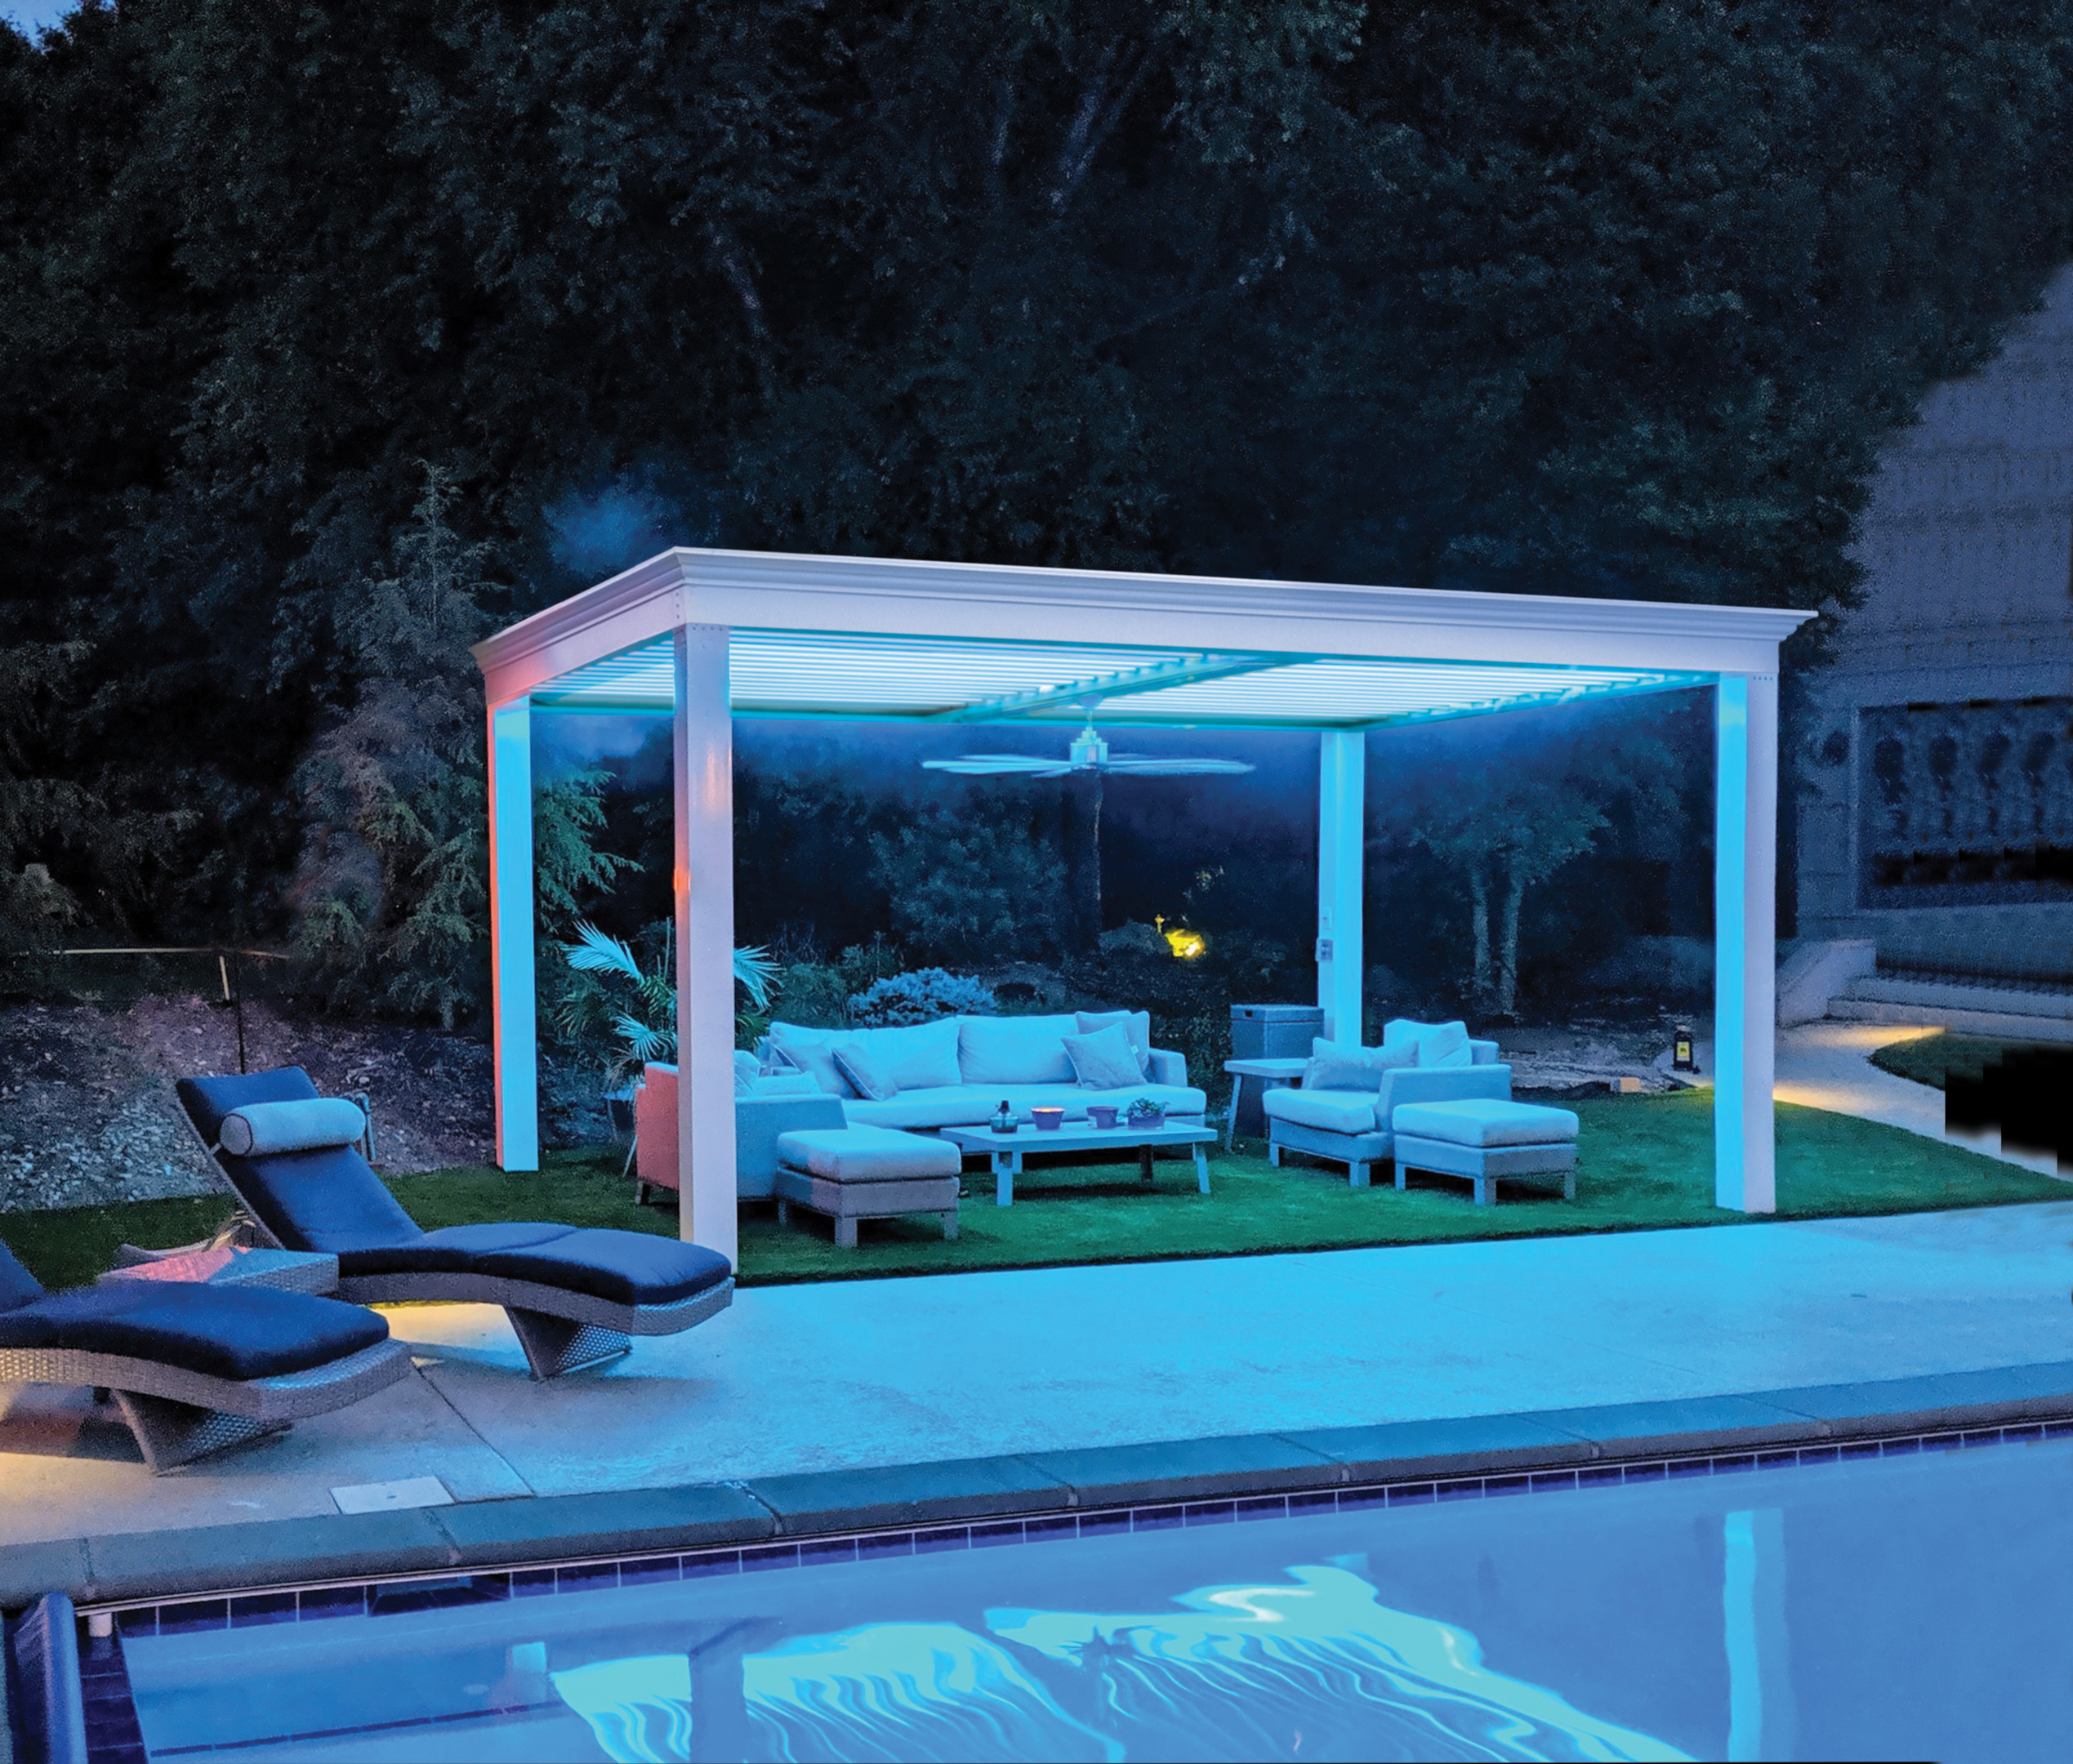 Pergola using led lighting near roof to elevate their outdoor living space